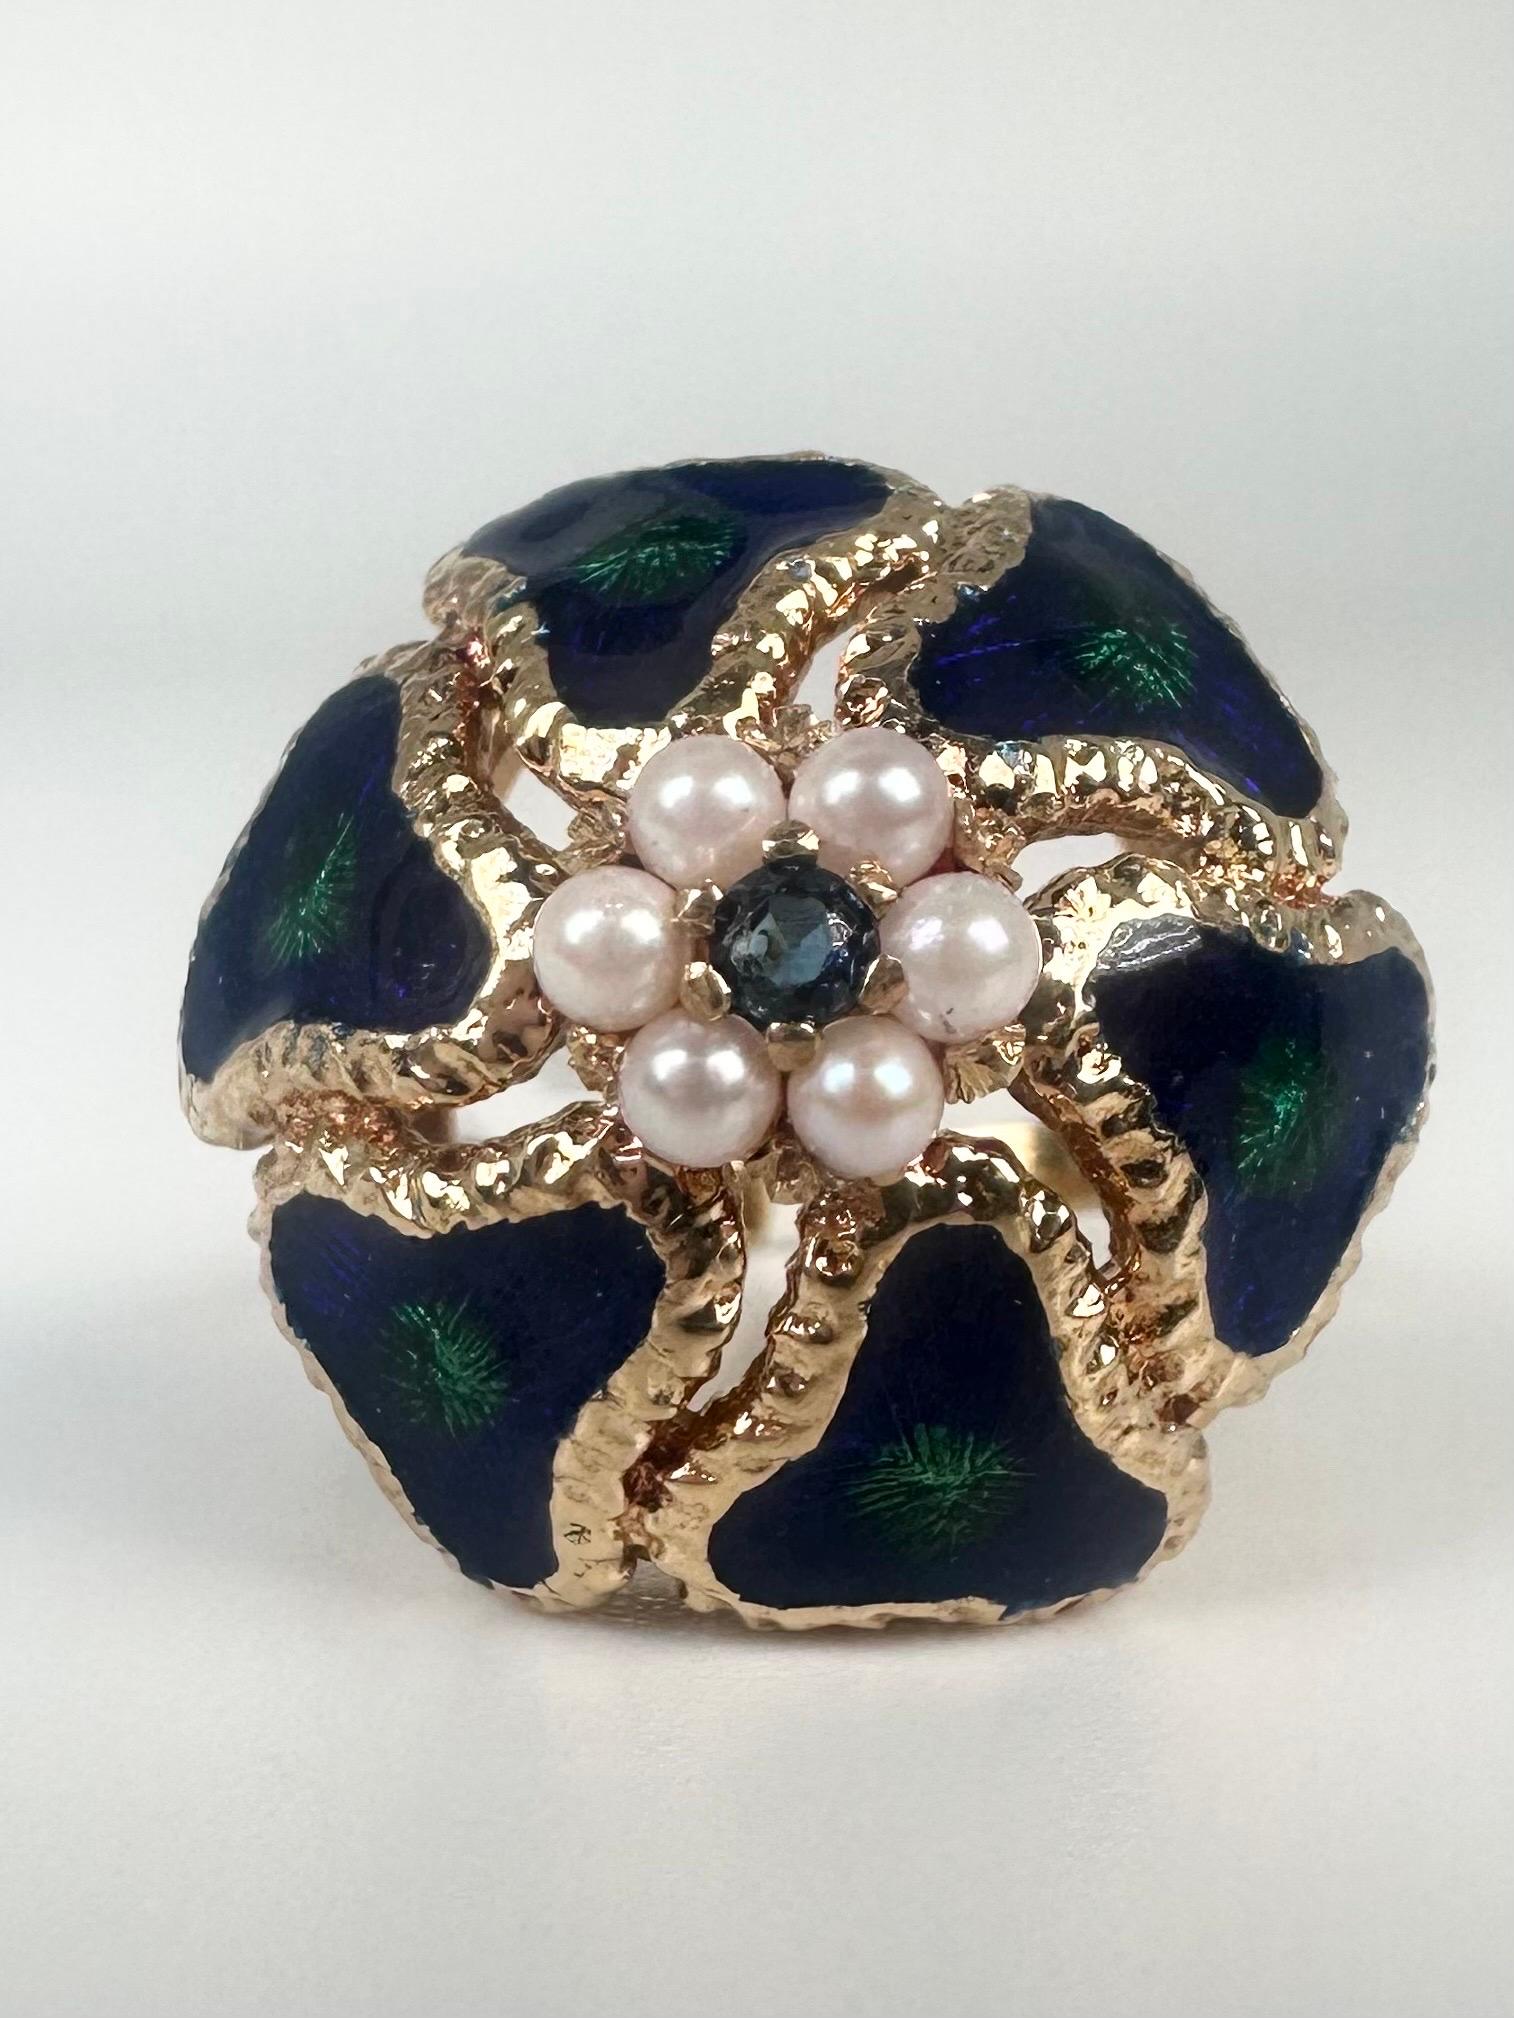 An art creation, a rare enamel work combining green and blue colors, stunning center sapphire and pearl halo in 14KT yellow gold. This ring is earthy with lots of meaning if you look at the ring you can feel so many emotions of our mother earth of